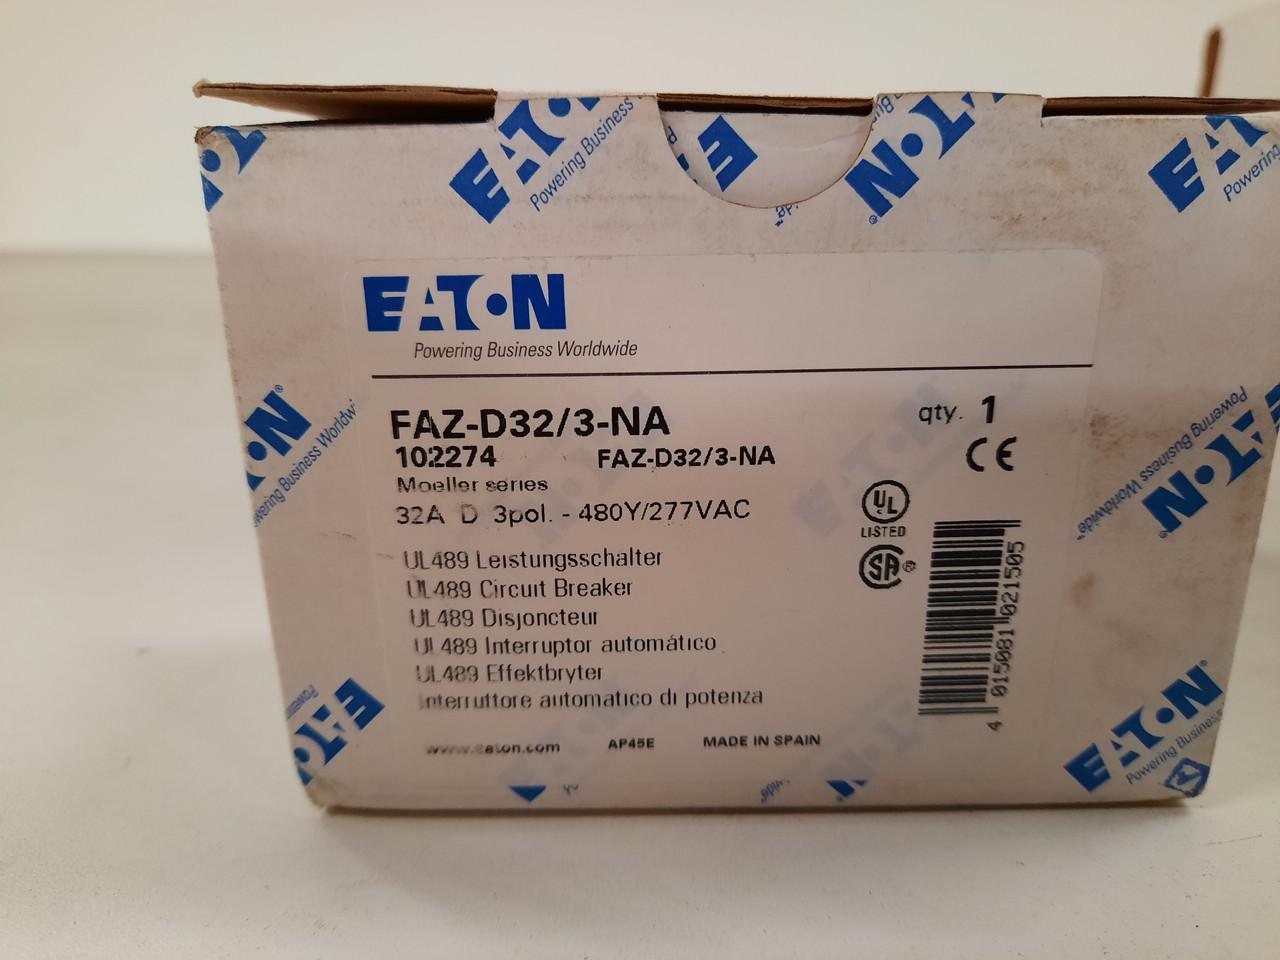 Eaton FAZ-D32/3-NA 277/480 VAC 50/60 Hz, 32 A, 3-Pole, 10/14 kA, 10 to 20 x Rated Current, Screw Terminal, DIN Rail Mount, Standard Packaging, D-Curve, Current Limiting, Thermal Magnetic